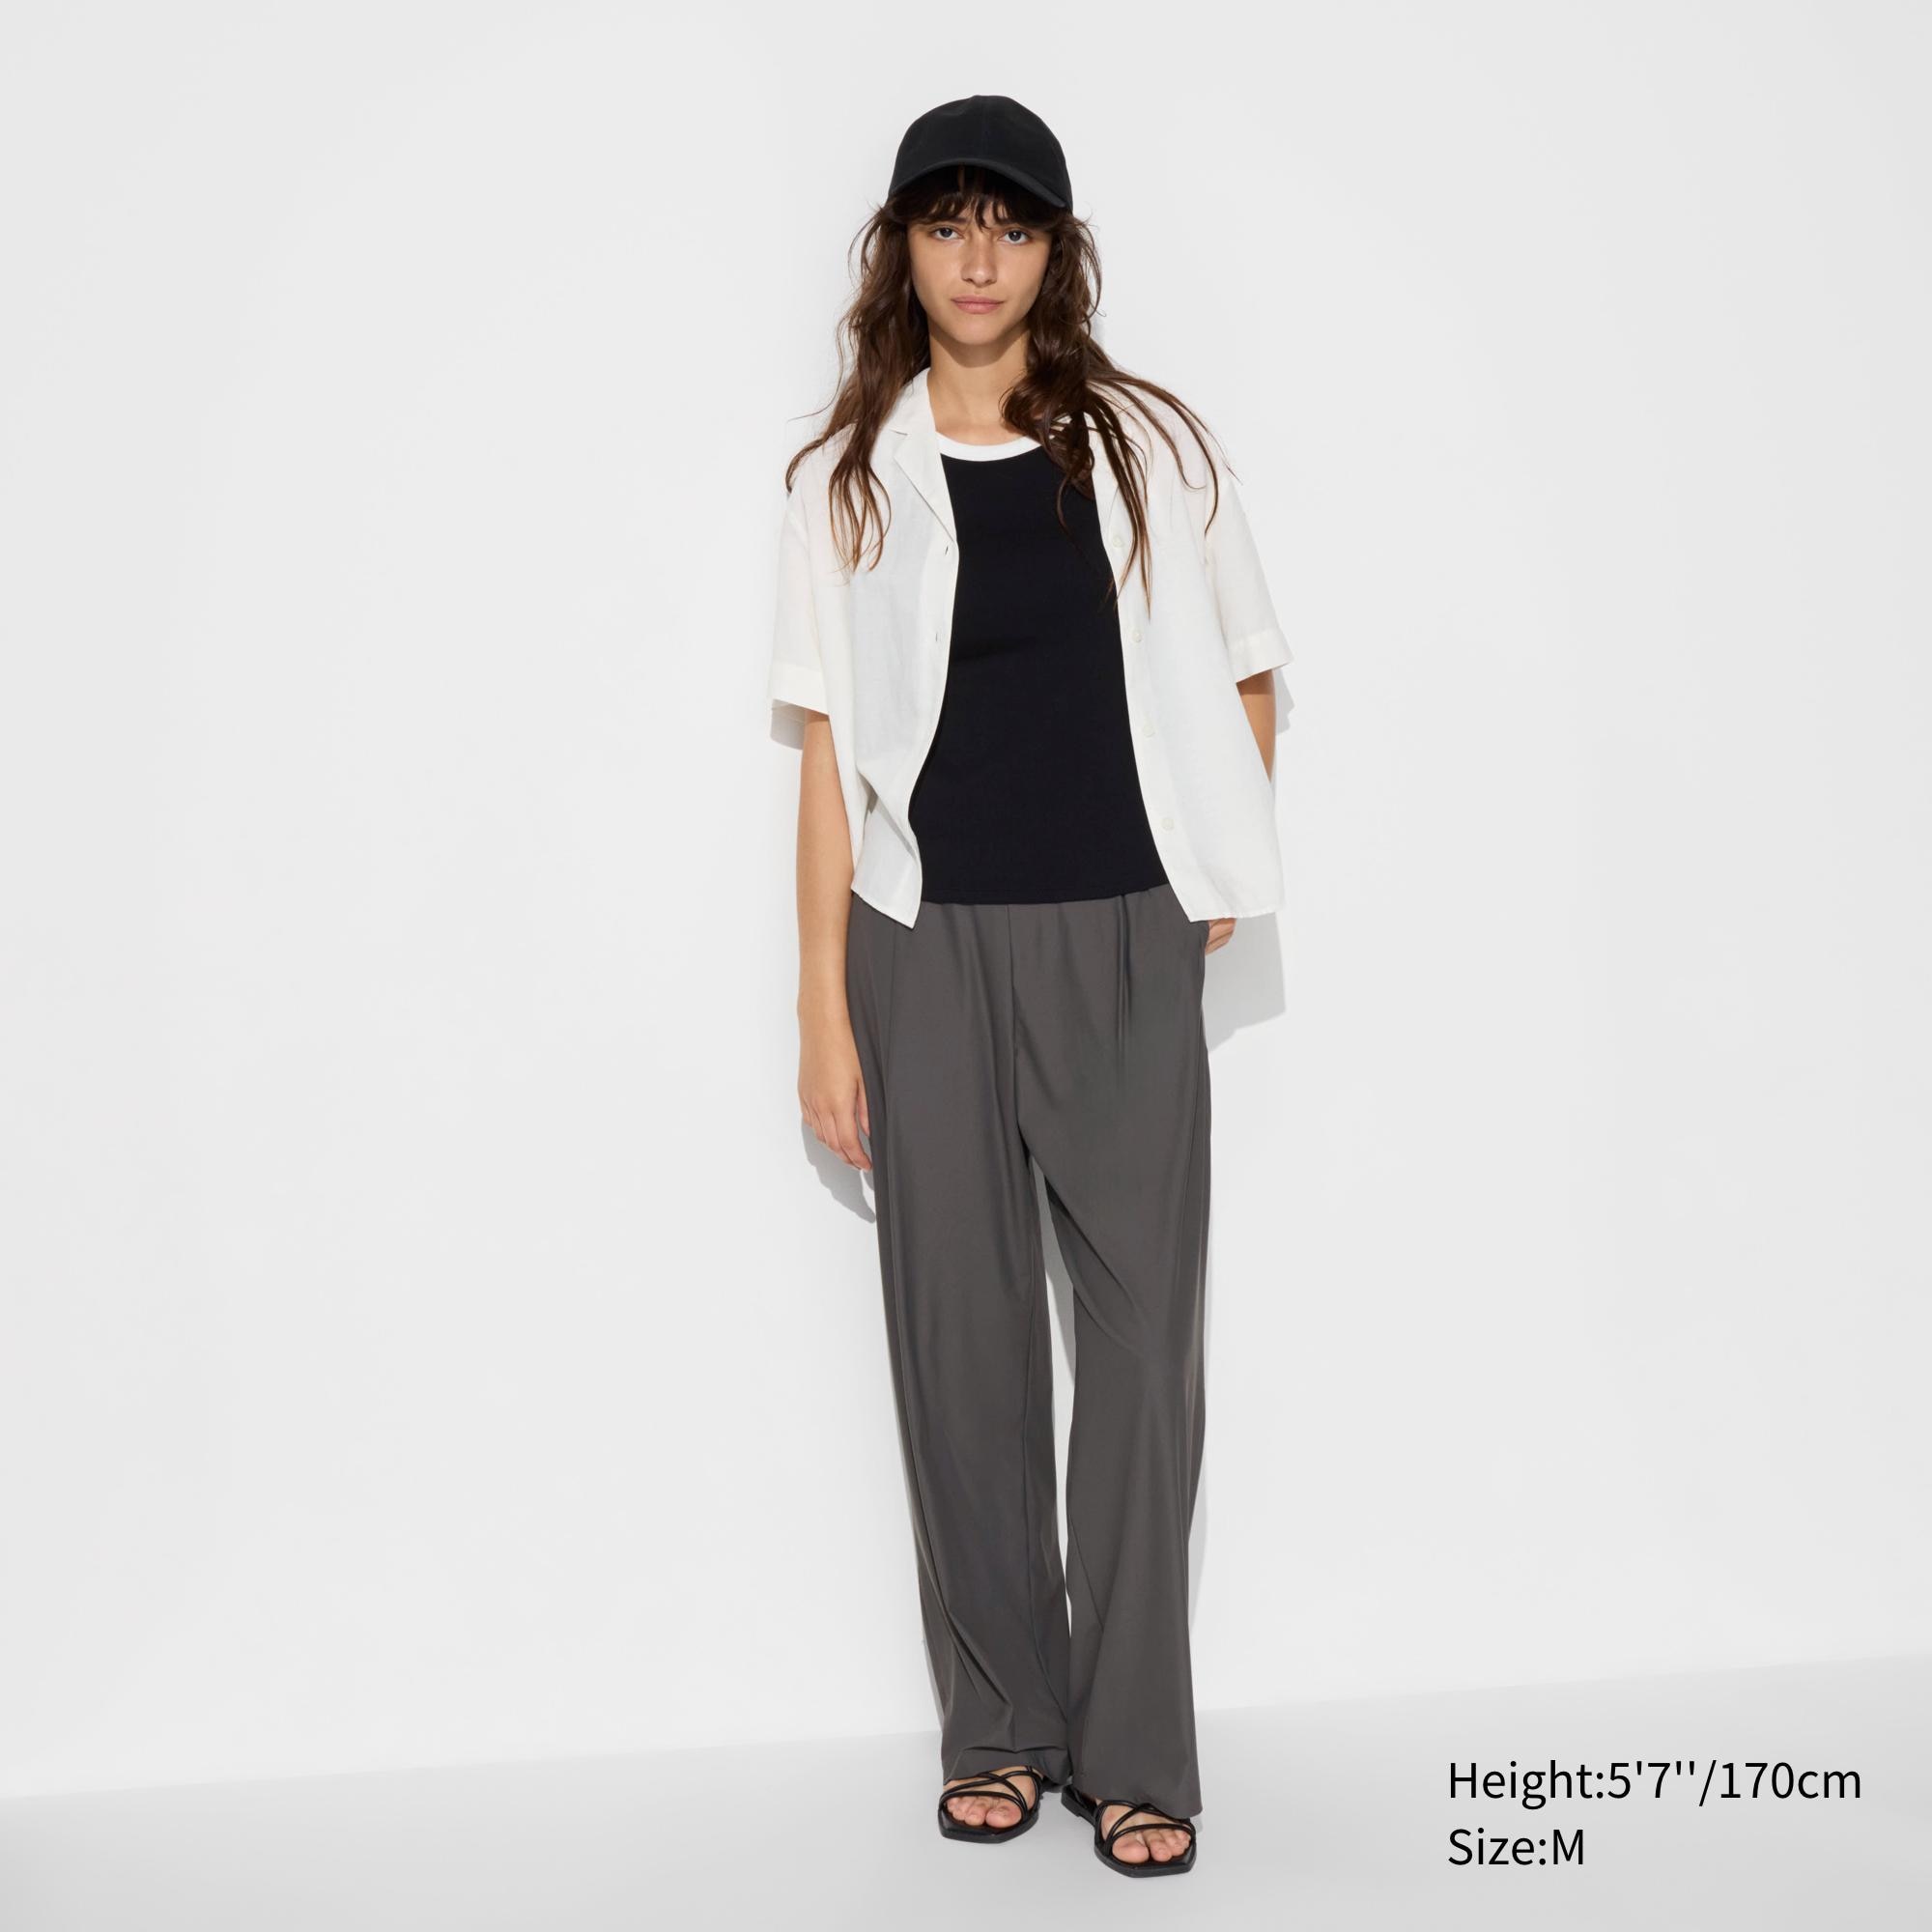 Are the viral UNIQLO work pants worth it? 🤔 | Gallery posted by Leah |  Lemon8